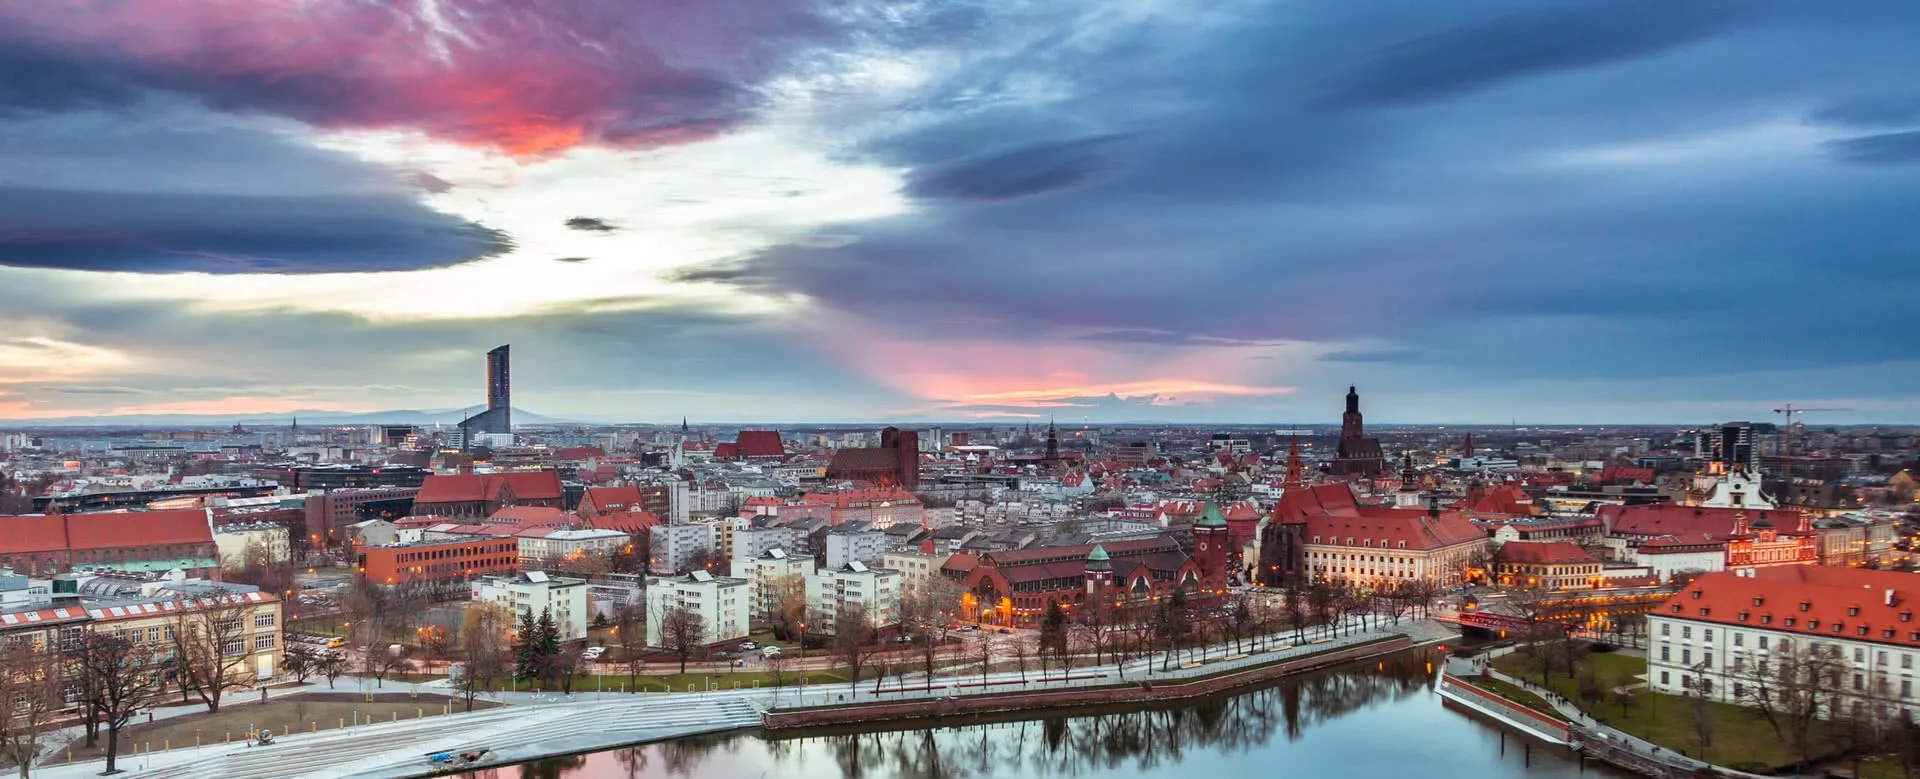 Wroclaw - the destination with youth hostels